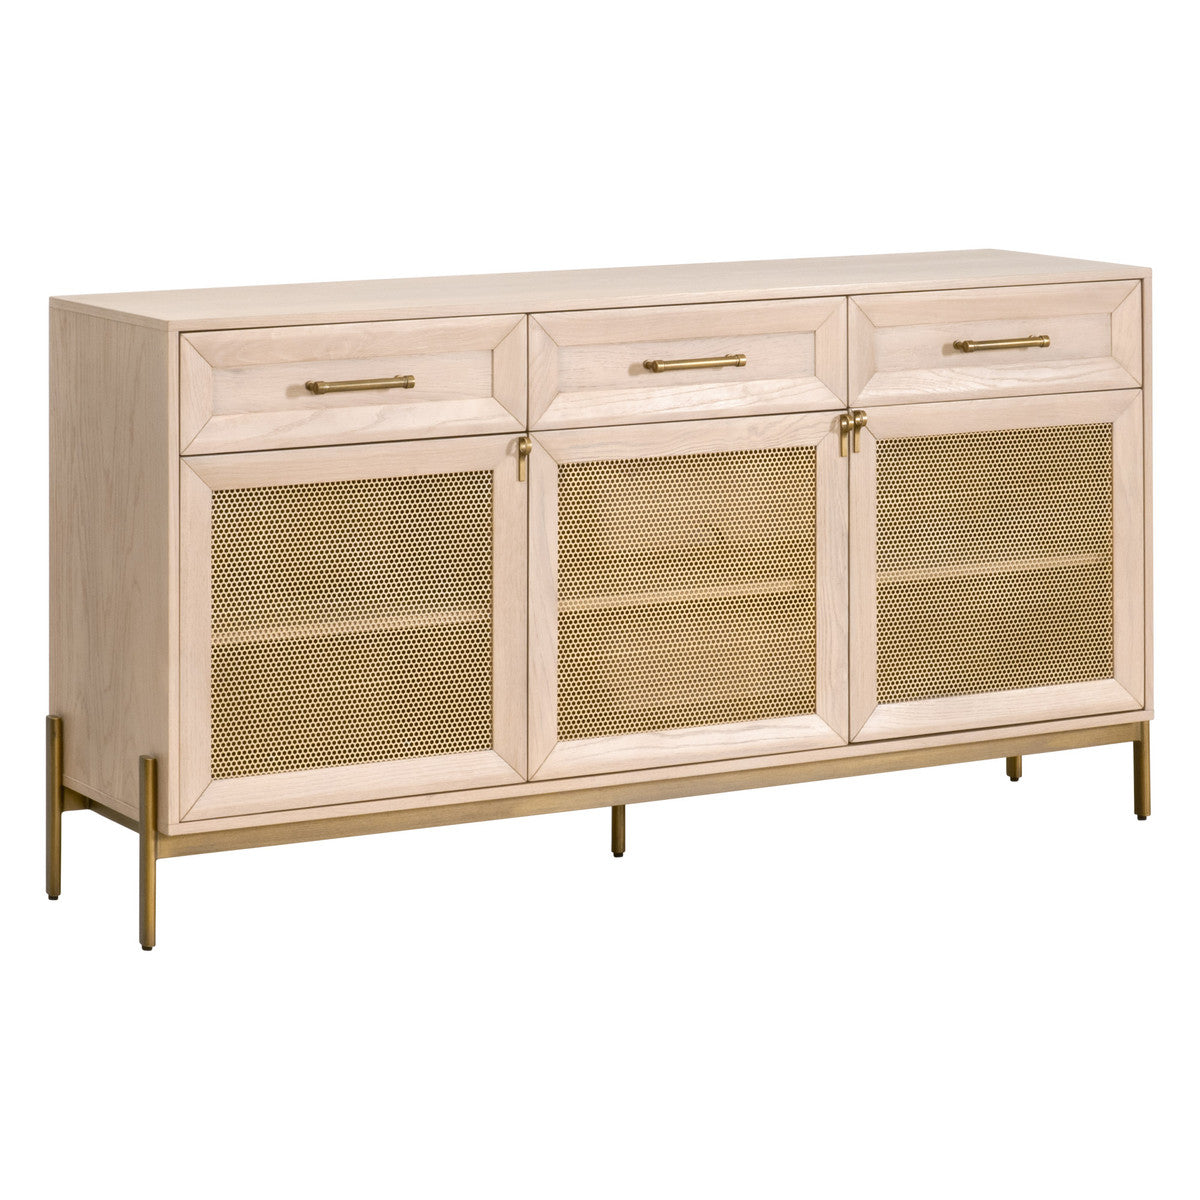 Essentials For Living Sideboards - Dwell Media Sideboard